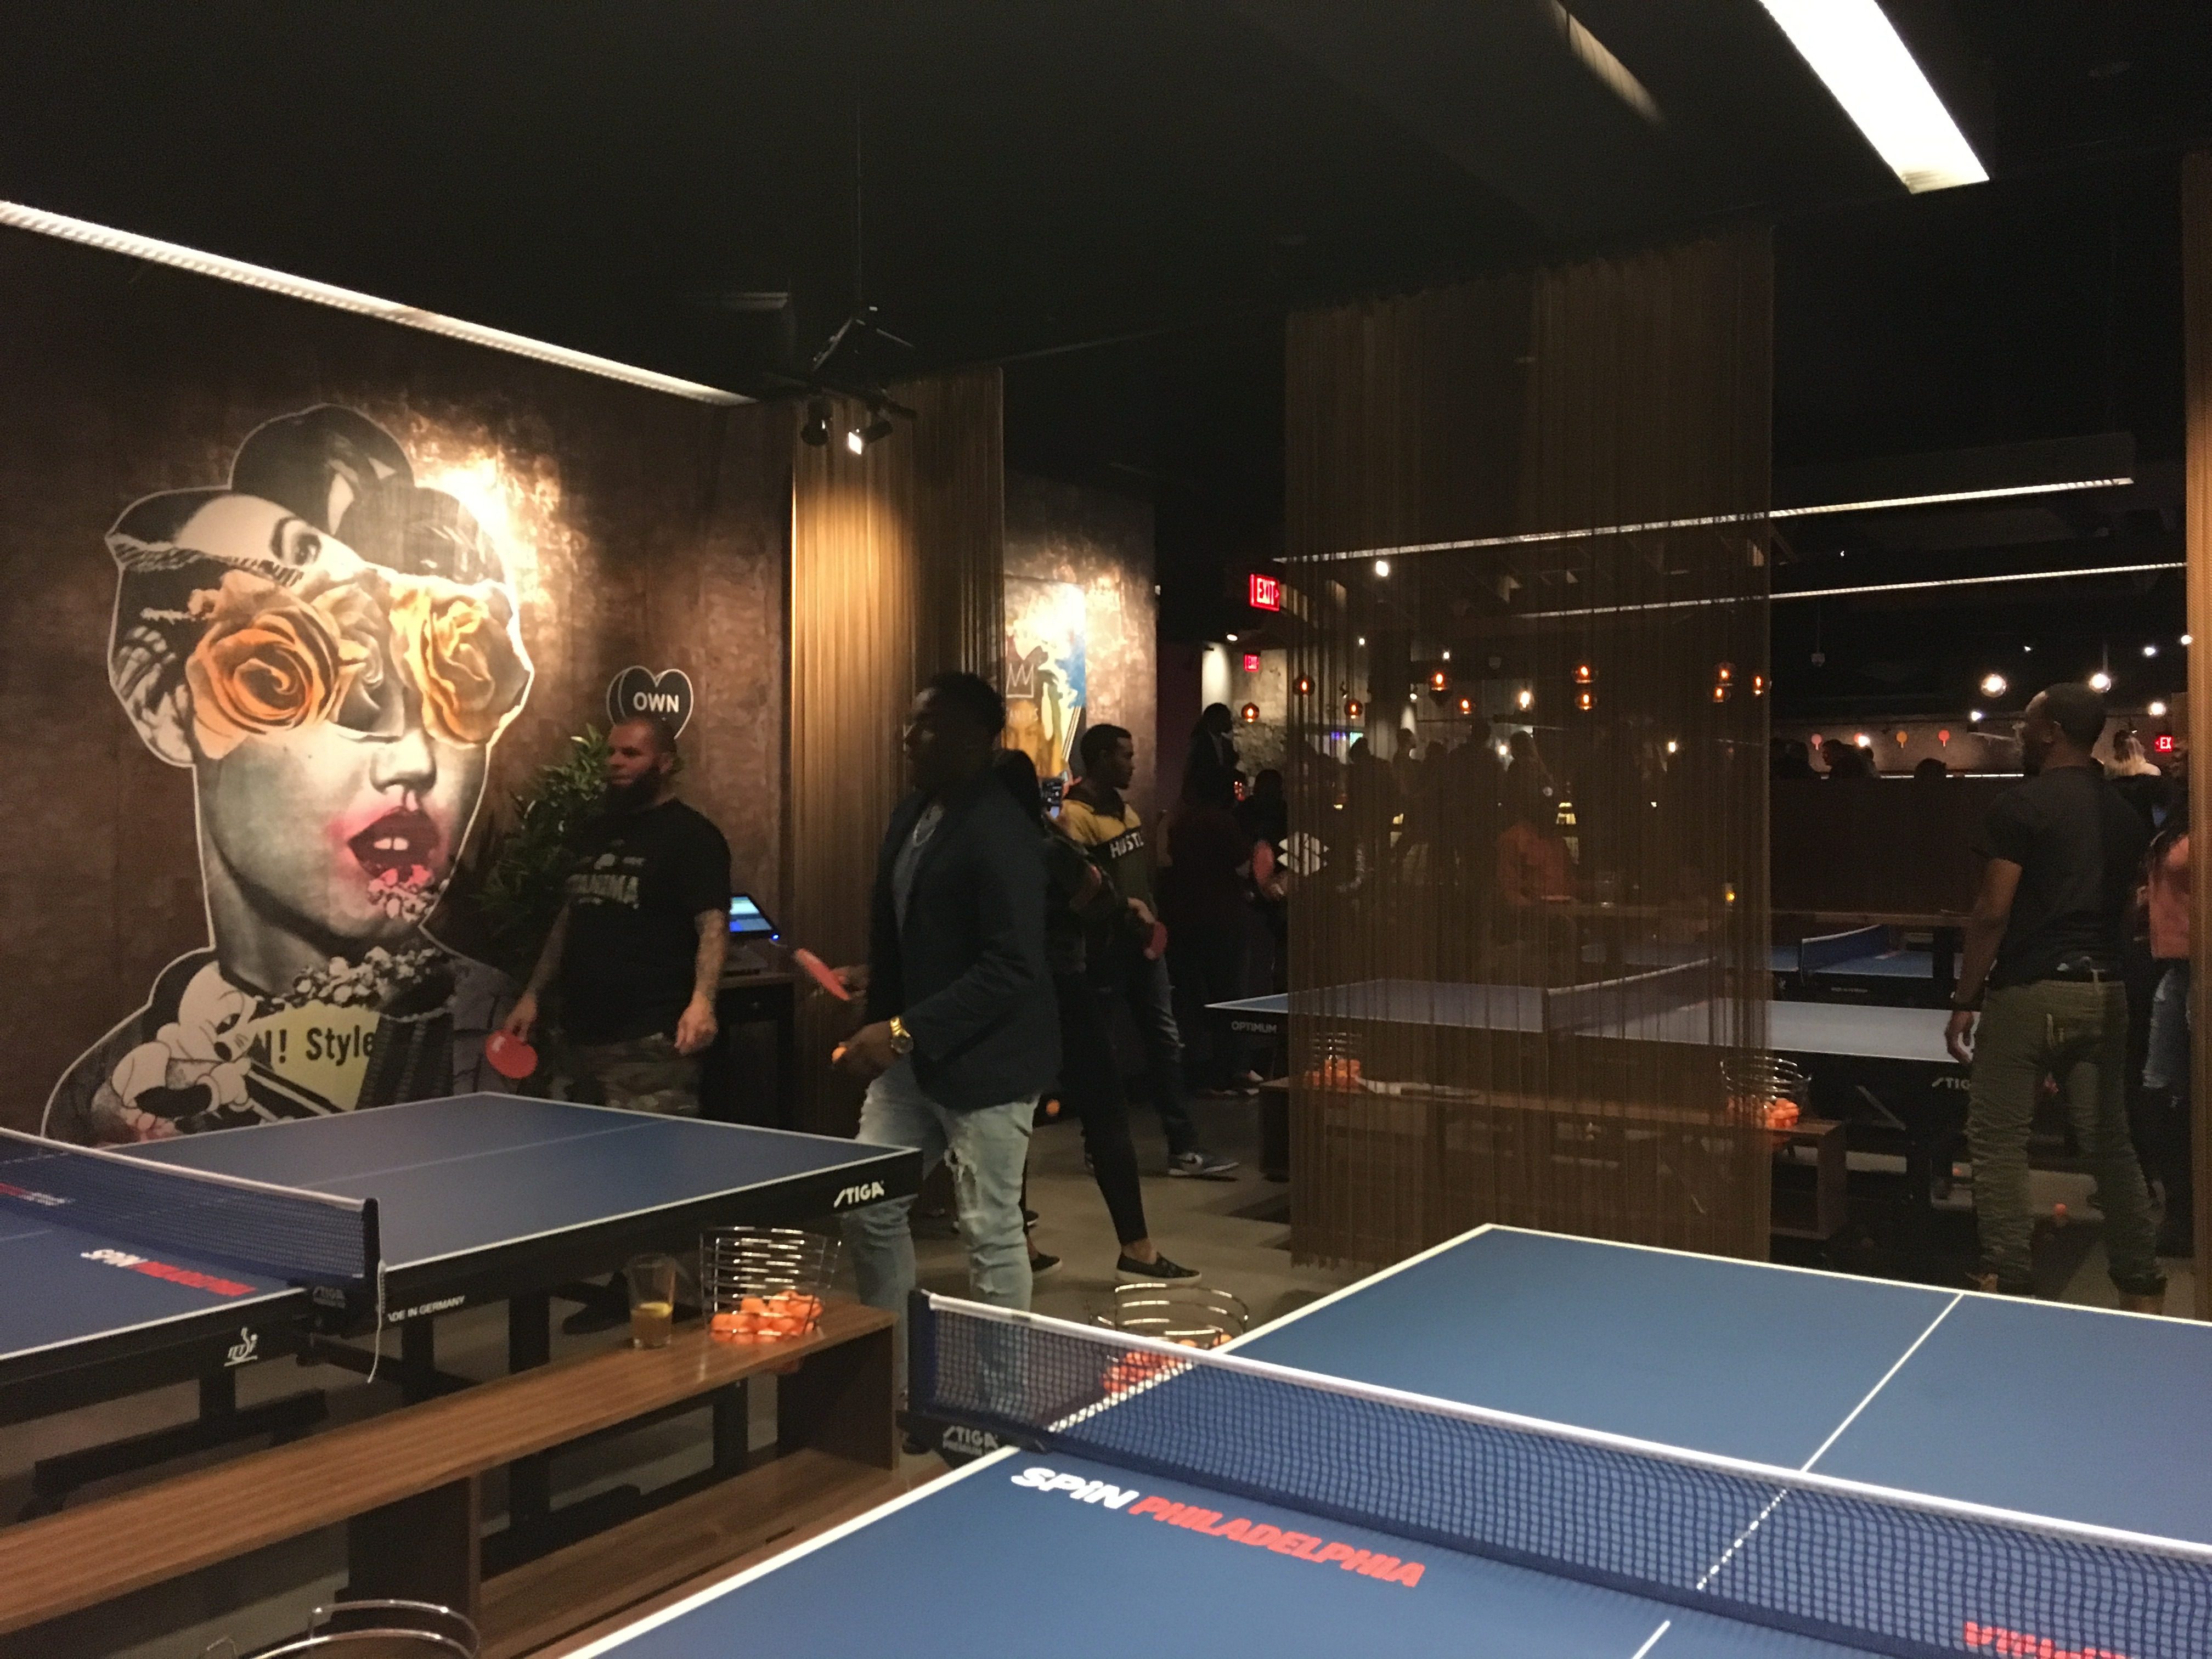 SPIN Philadelphia  United by Ping Pong